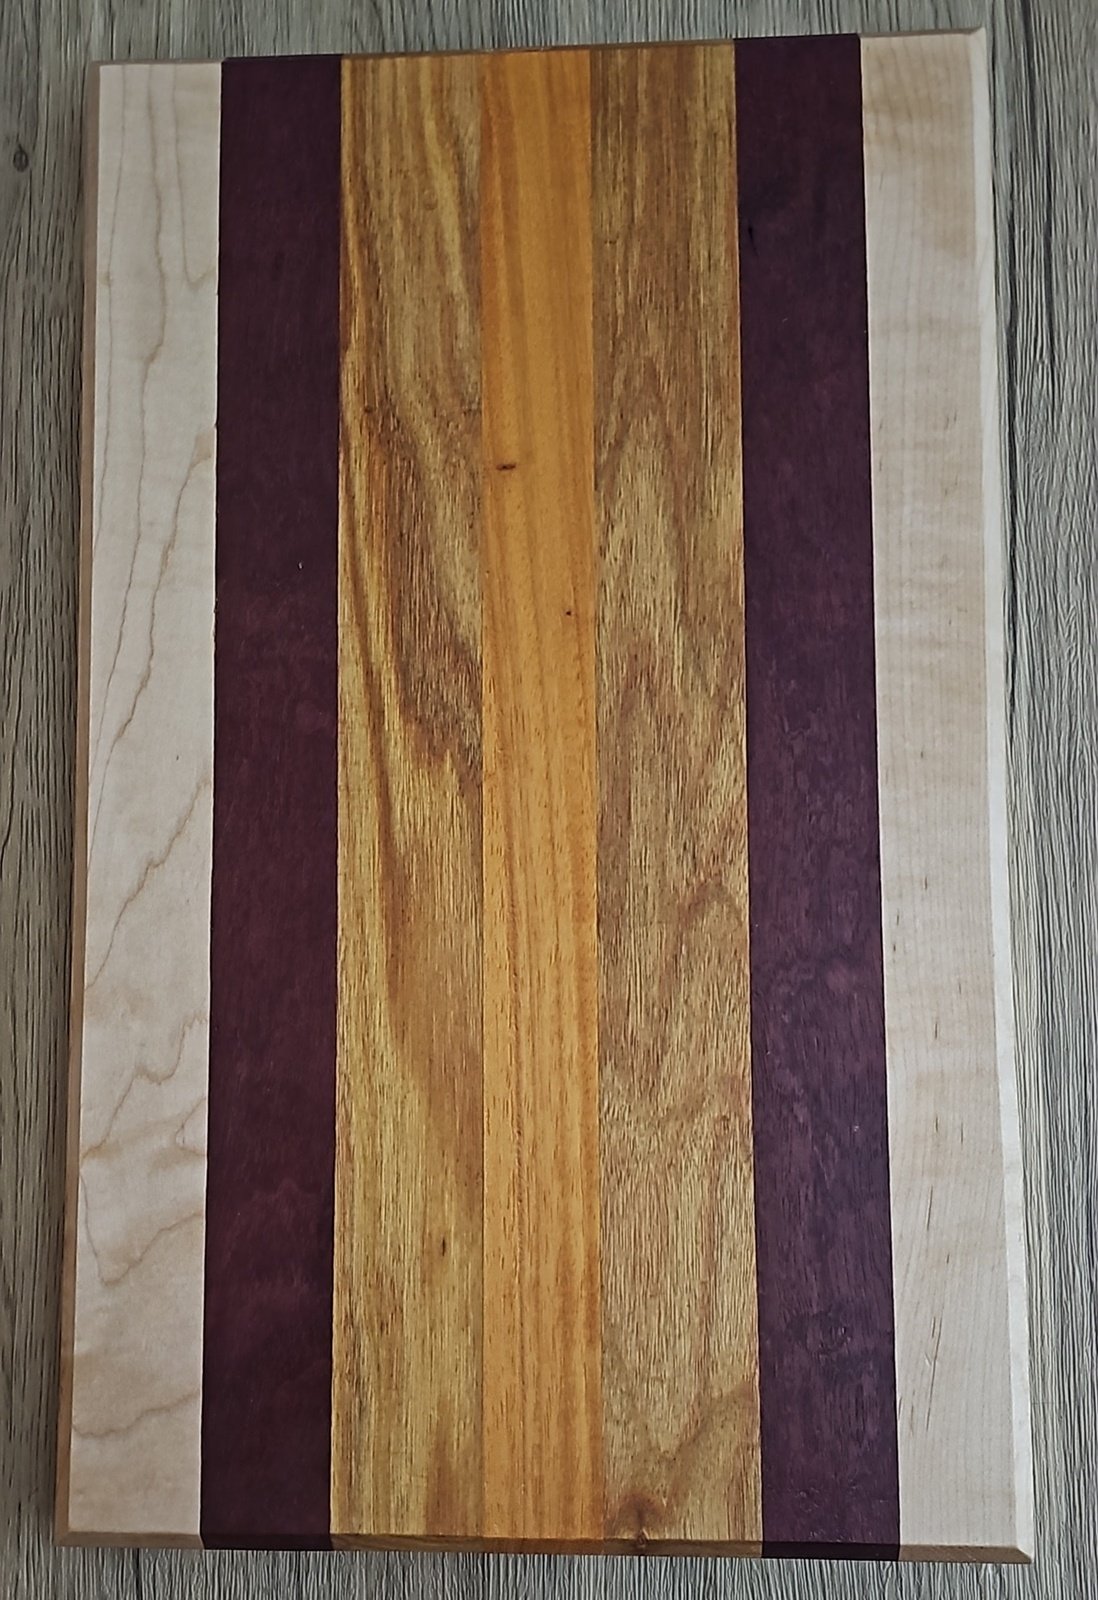 Purple Heart, Maple and Canary Charcuterie Boards/Serving Board/Cutting Board